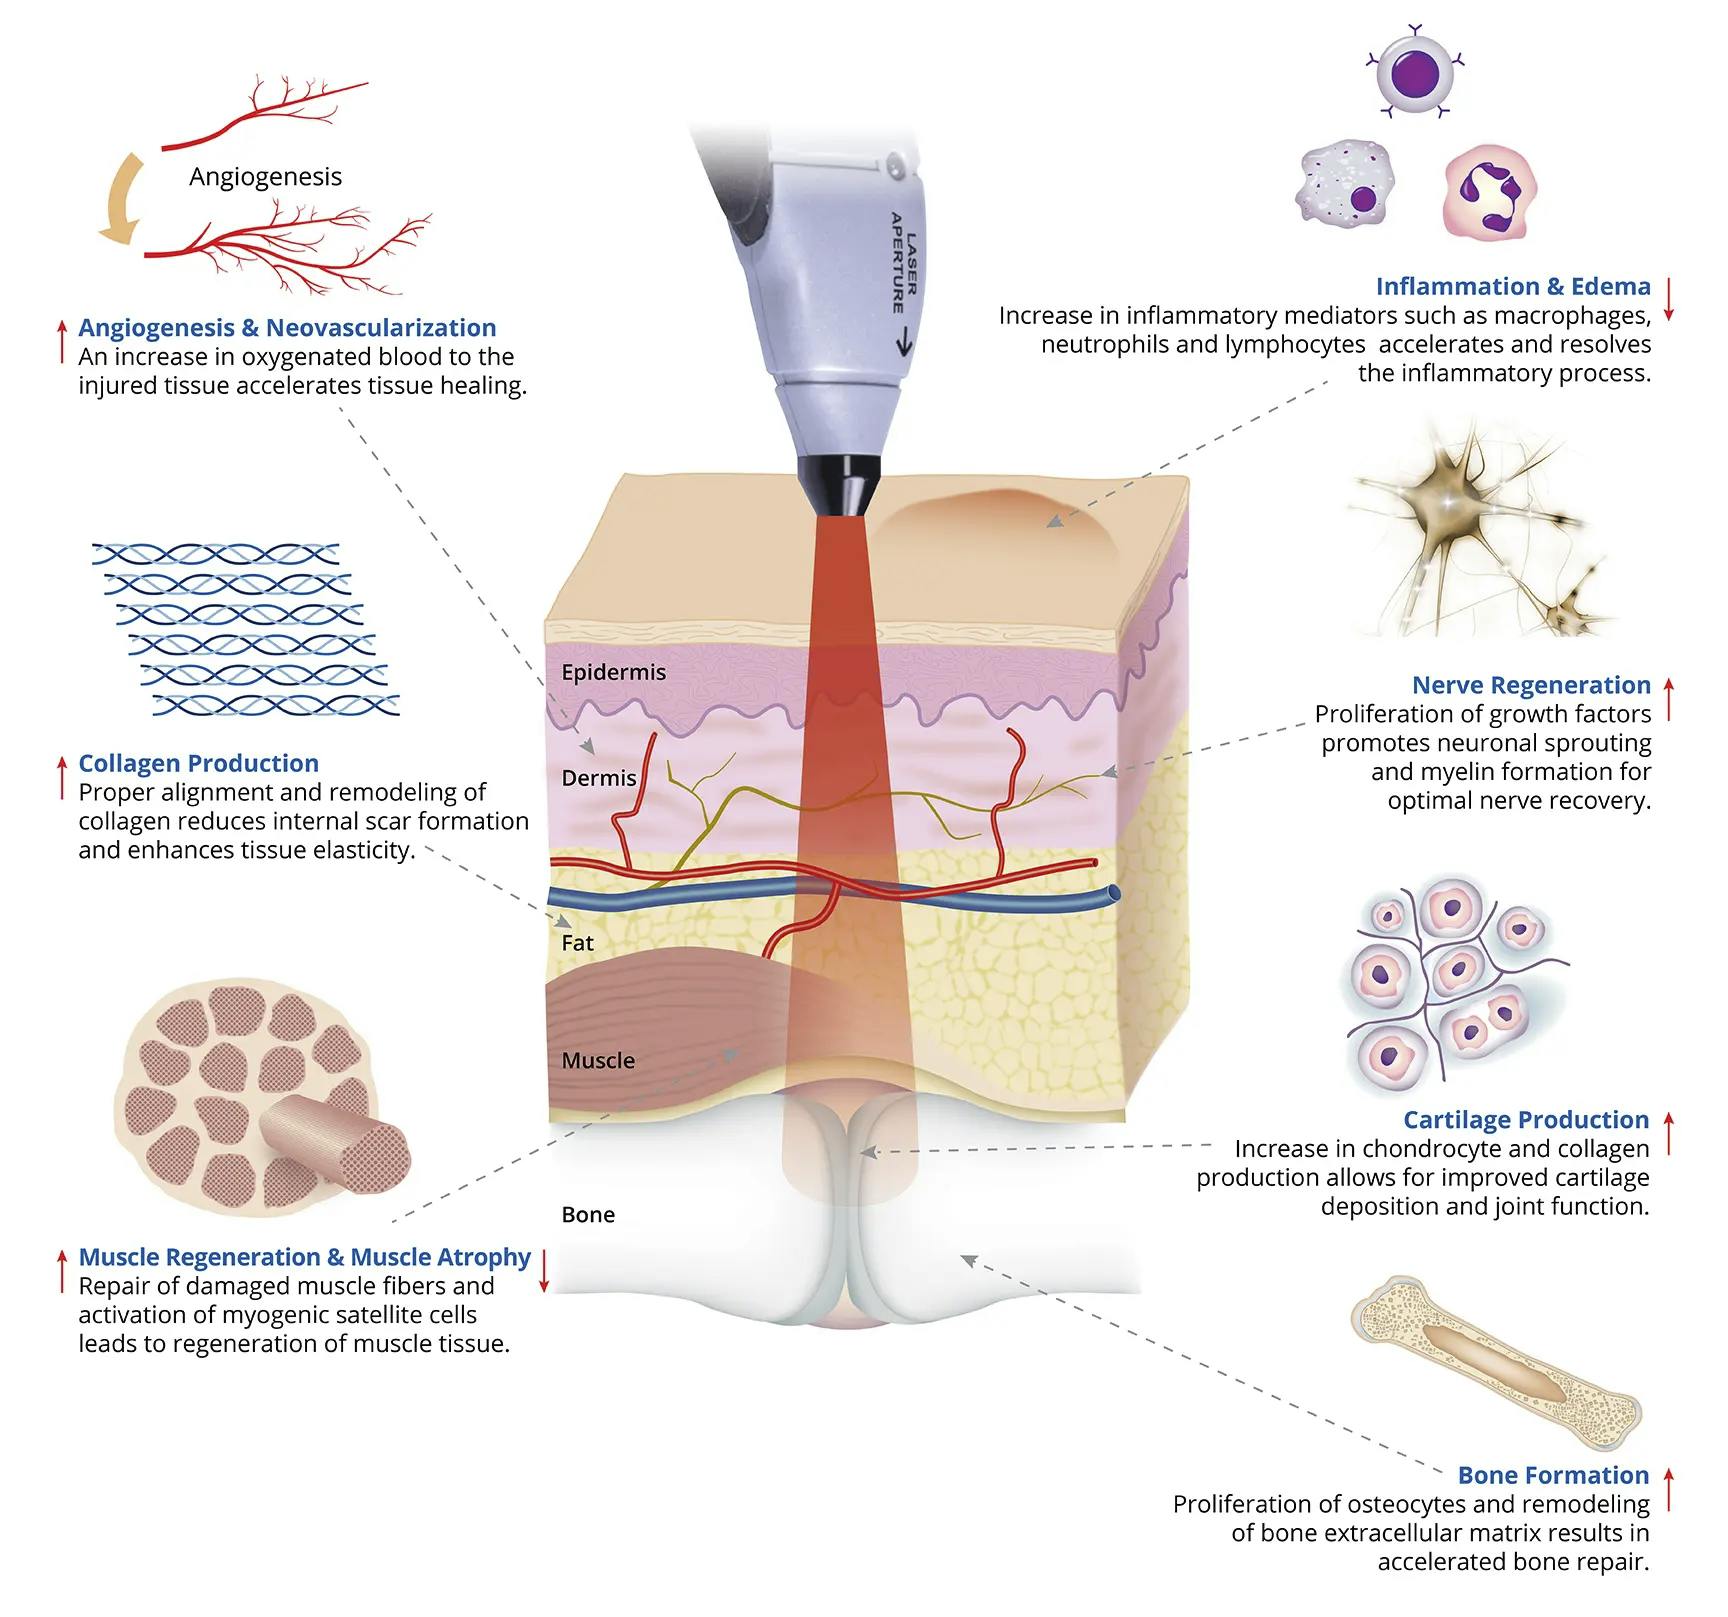 Image showing the clinical effects of laser therapy